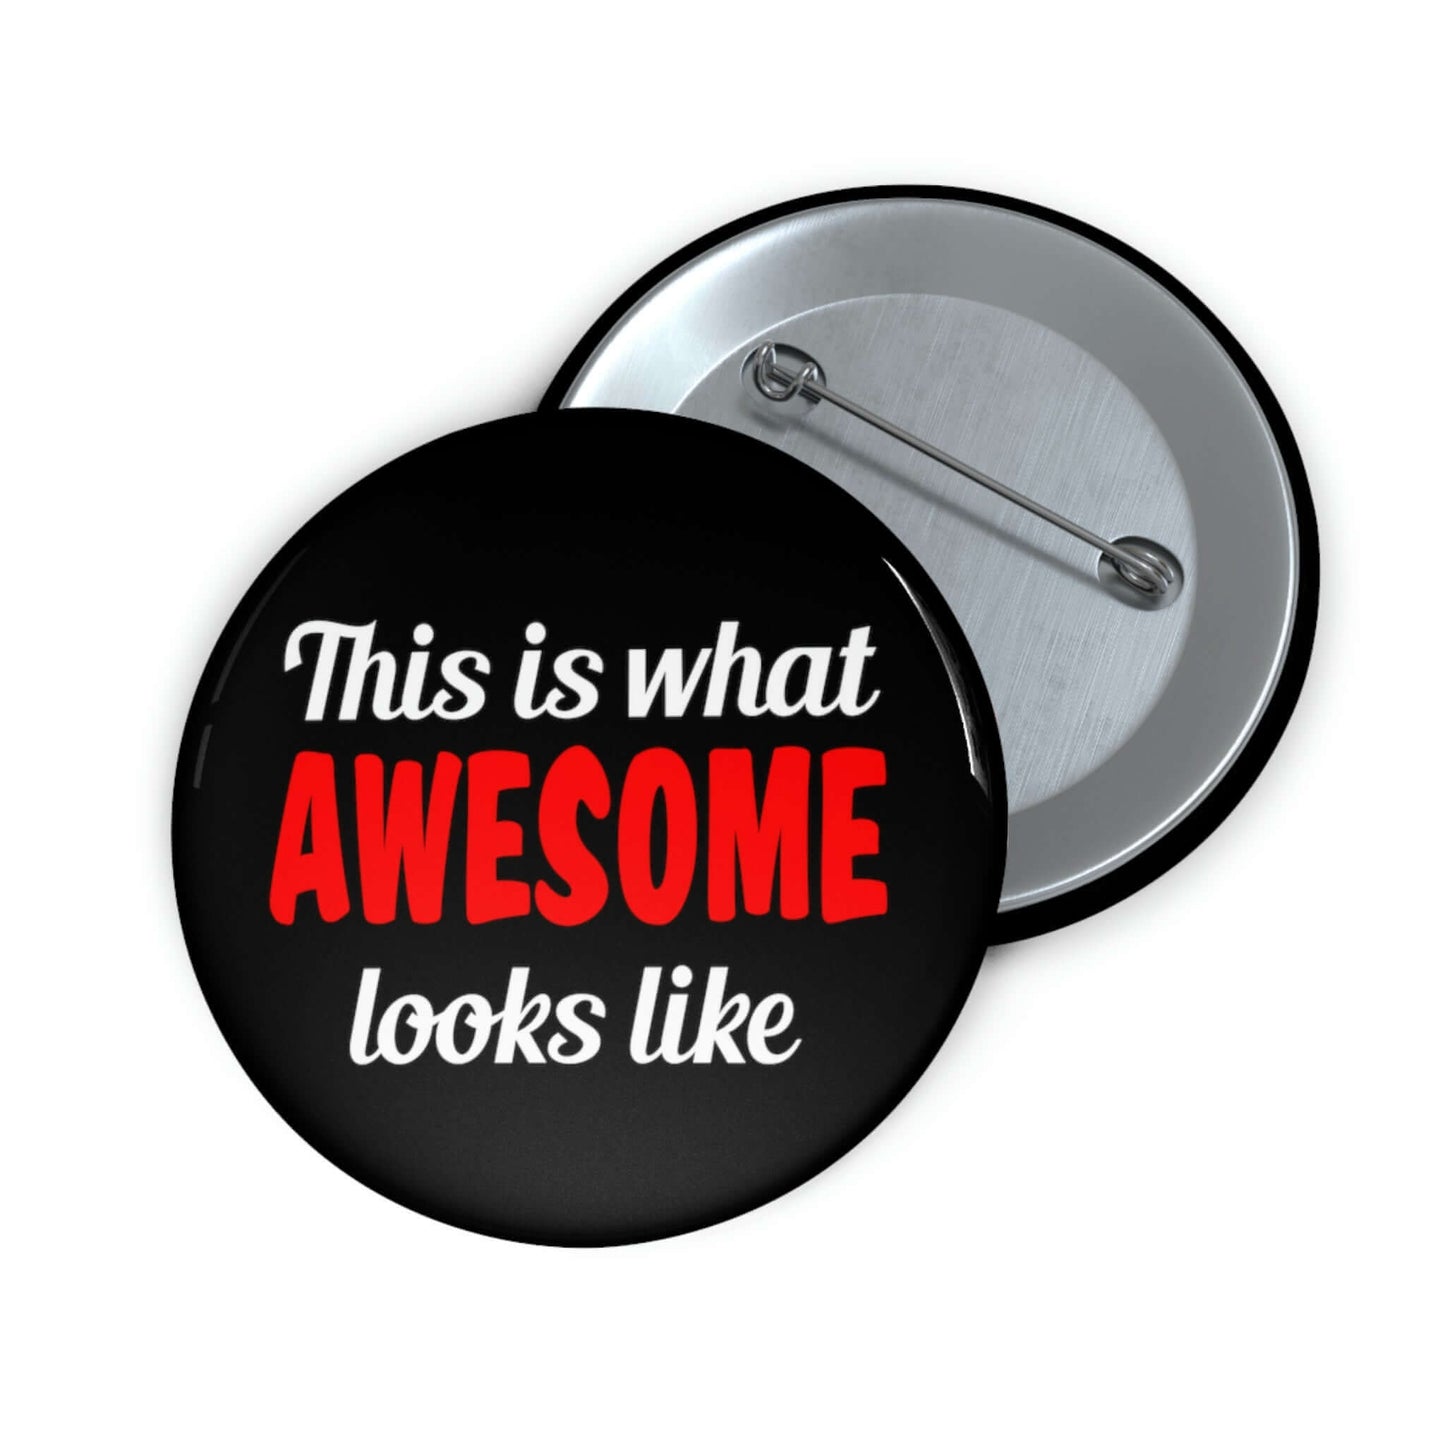 This is what awesome looks like pinback button